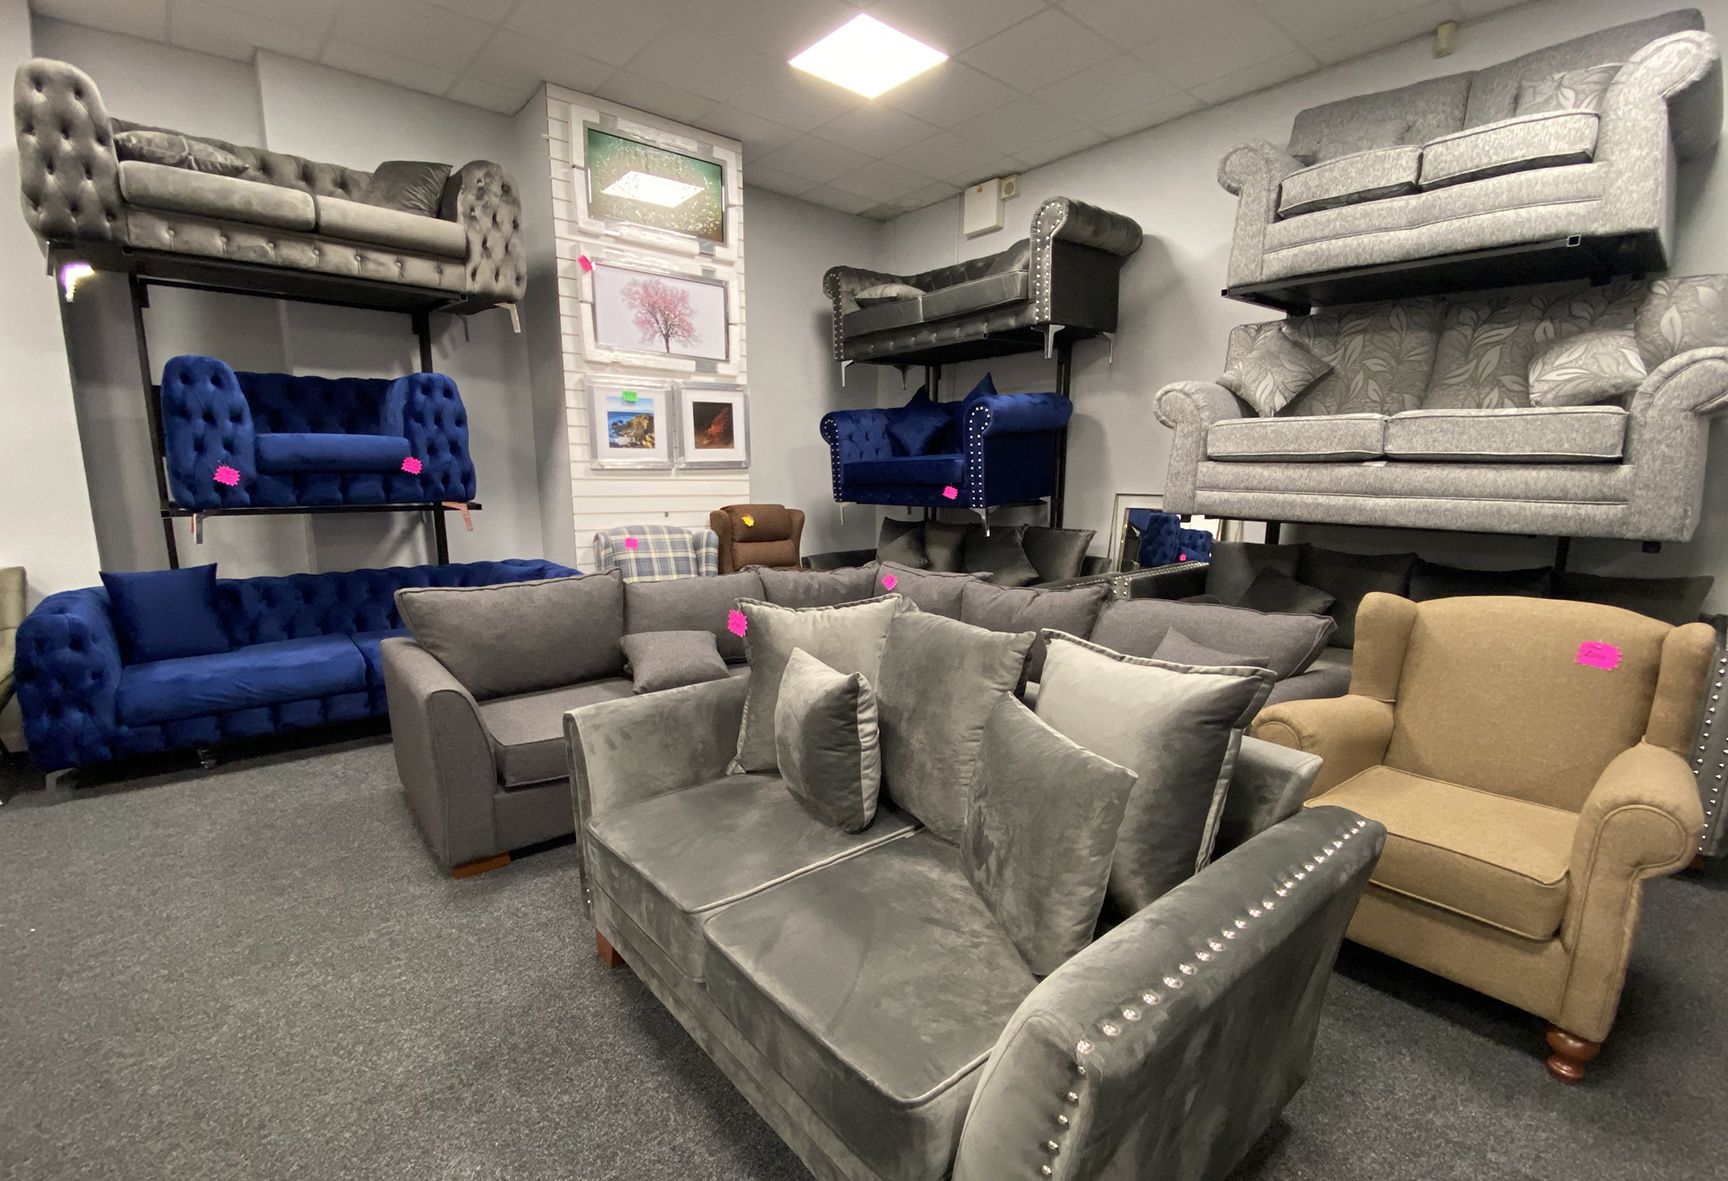 SELECTION: If you are in the market for a new bed, sofa or dining set with delivery in time for Christmas you should take a trip to The Little Belfast Furniture Shop in the Dairy Farm Centre